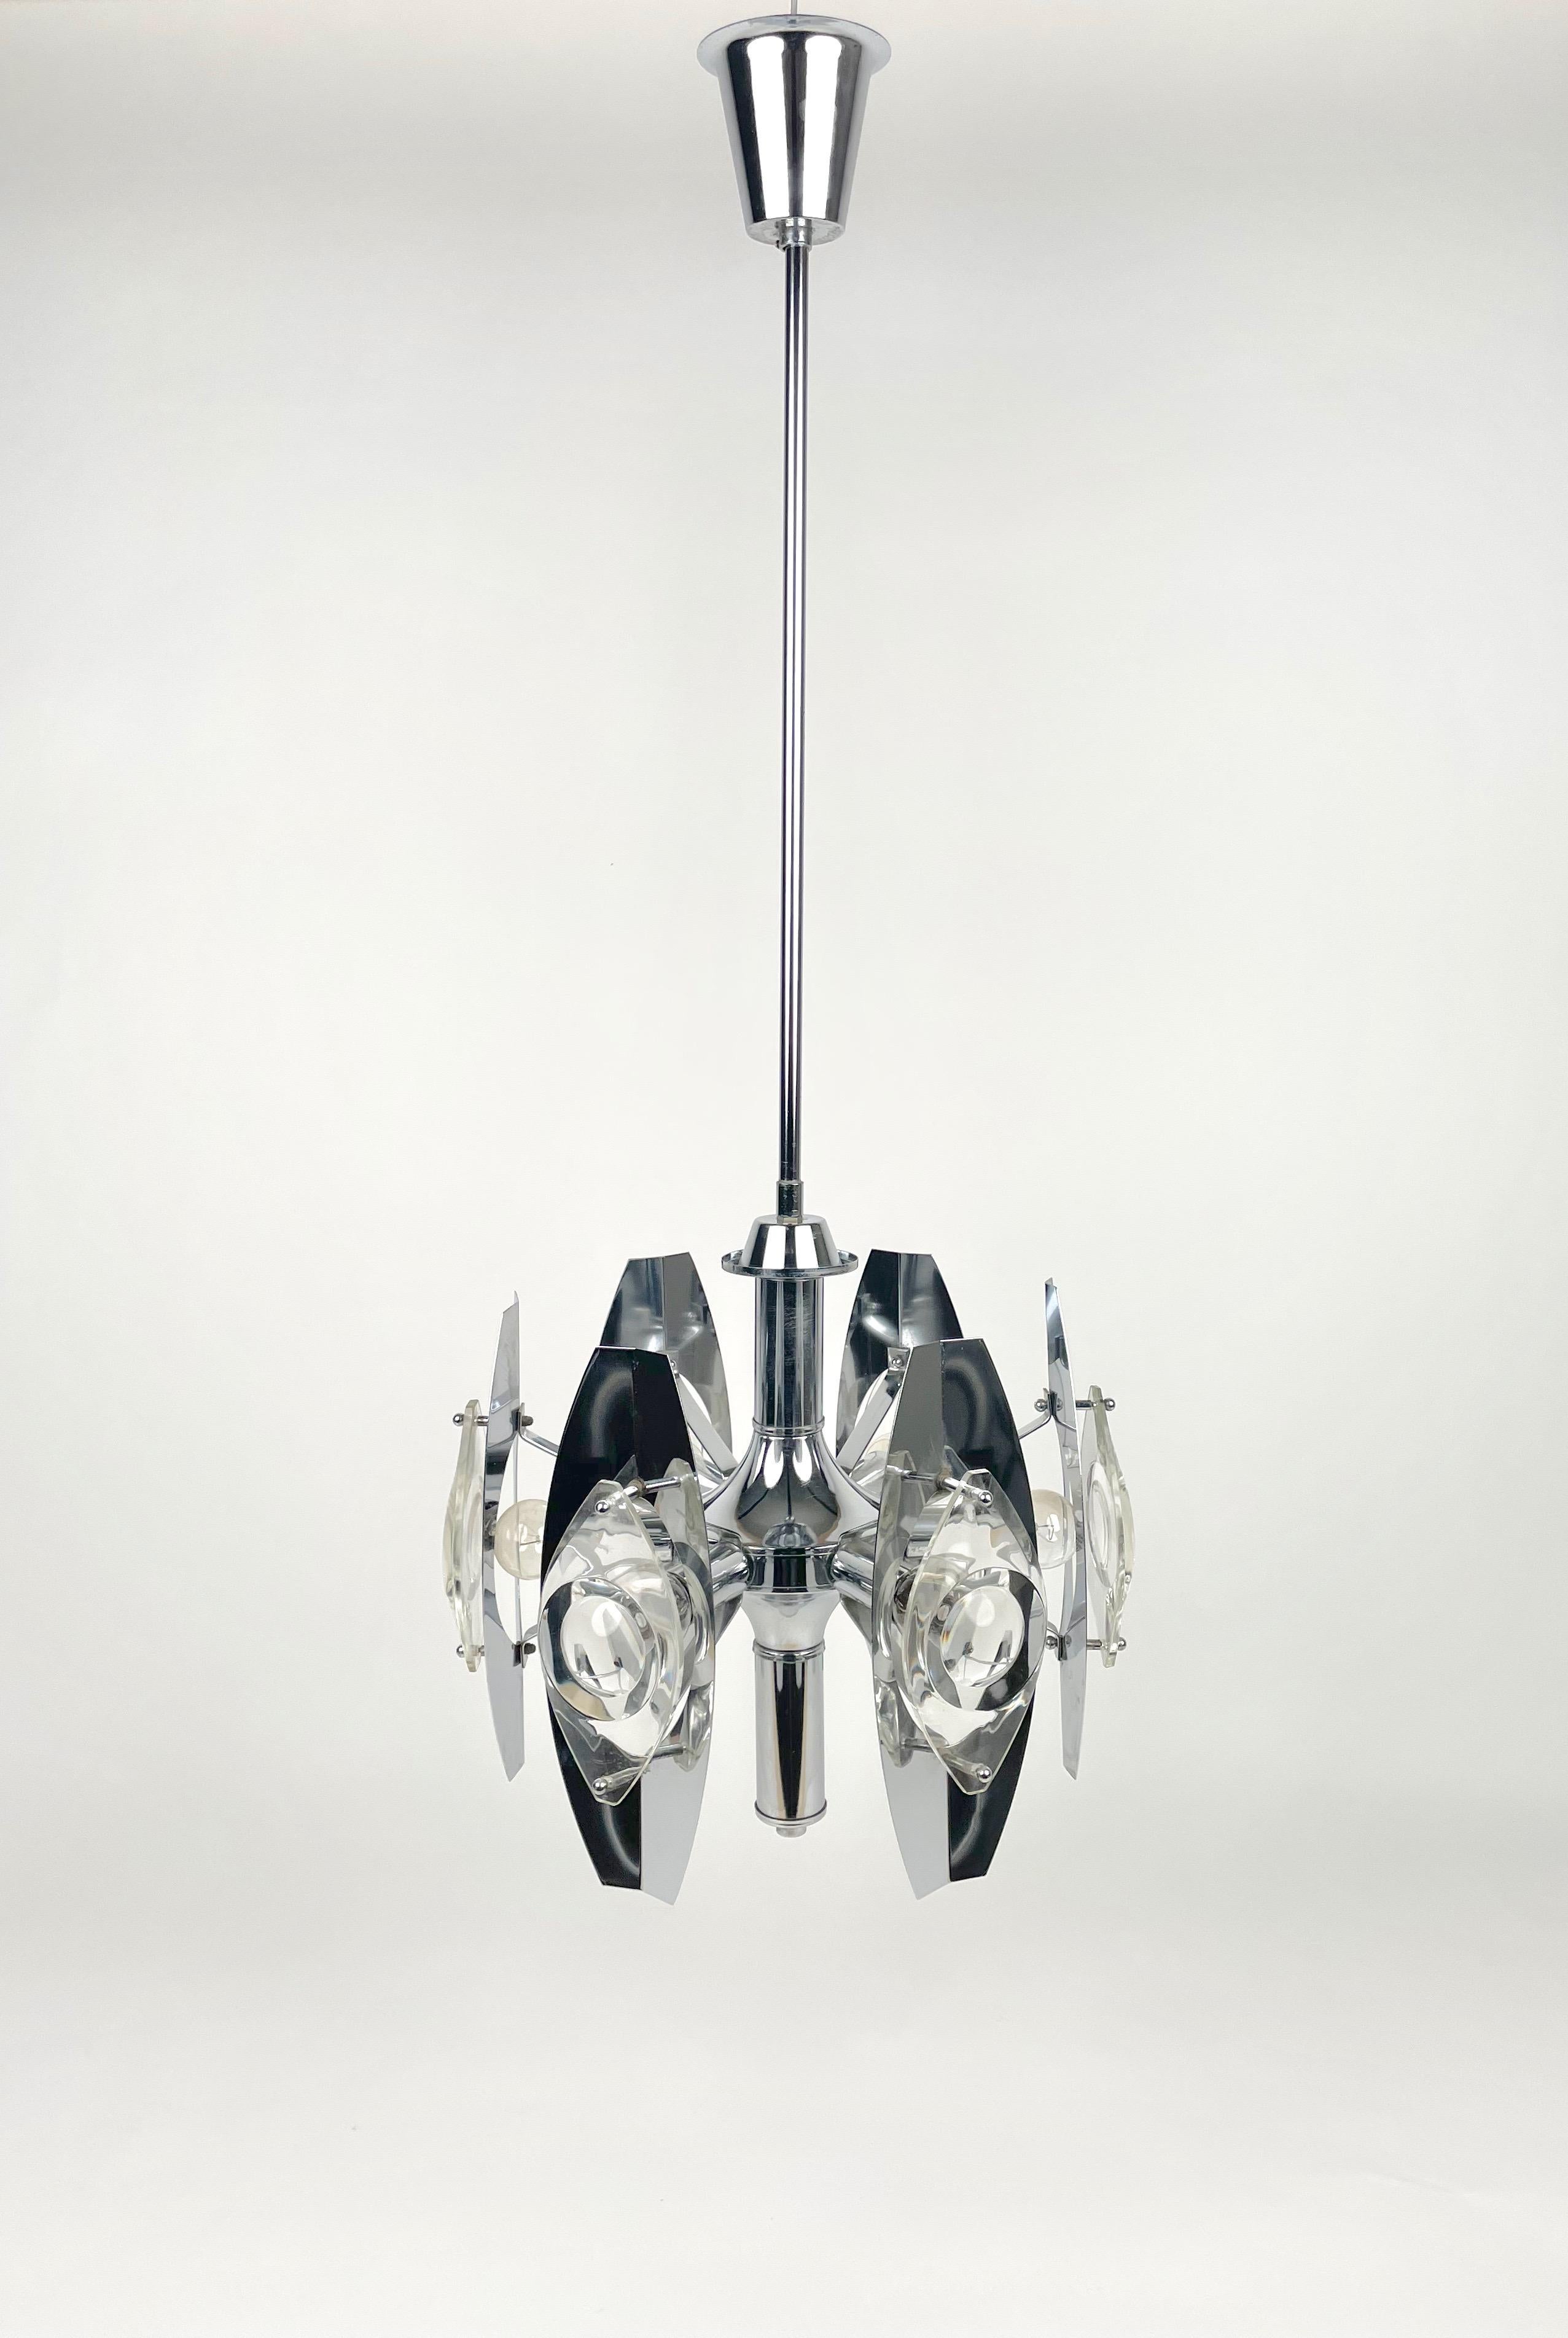 Impressive chandelier featuring six lights in chrome and glass lens by the Italian designer Oscar Torlasco. 

Made in Italy in the 1960s.